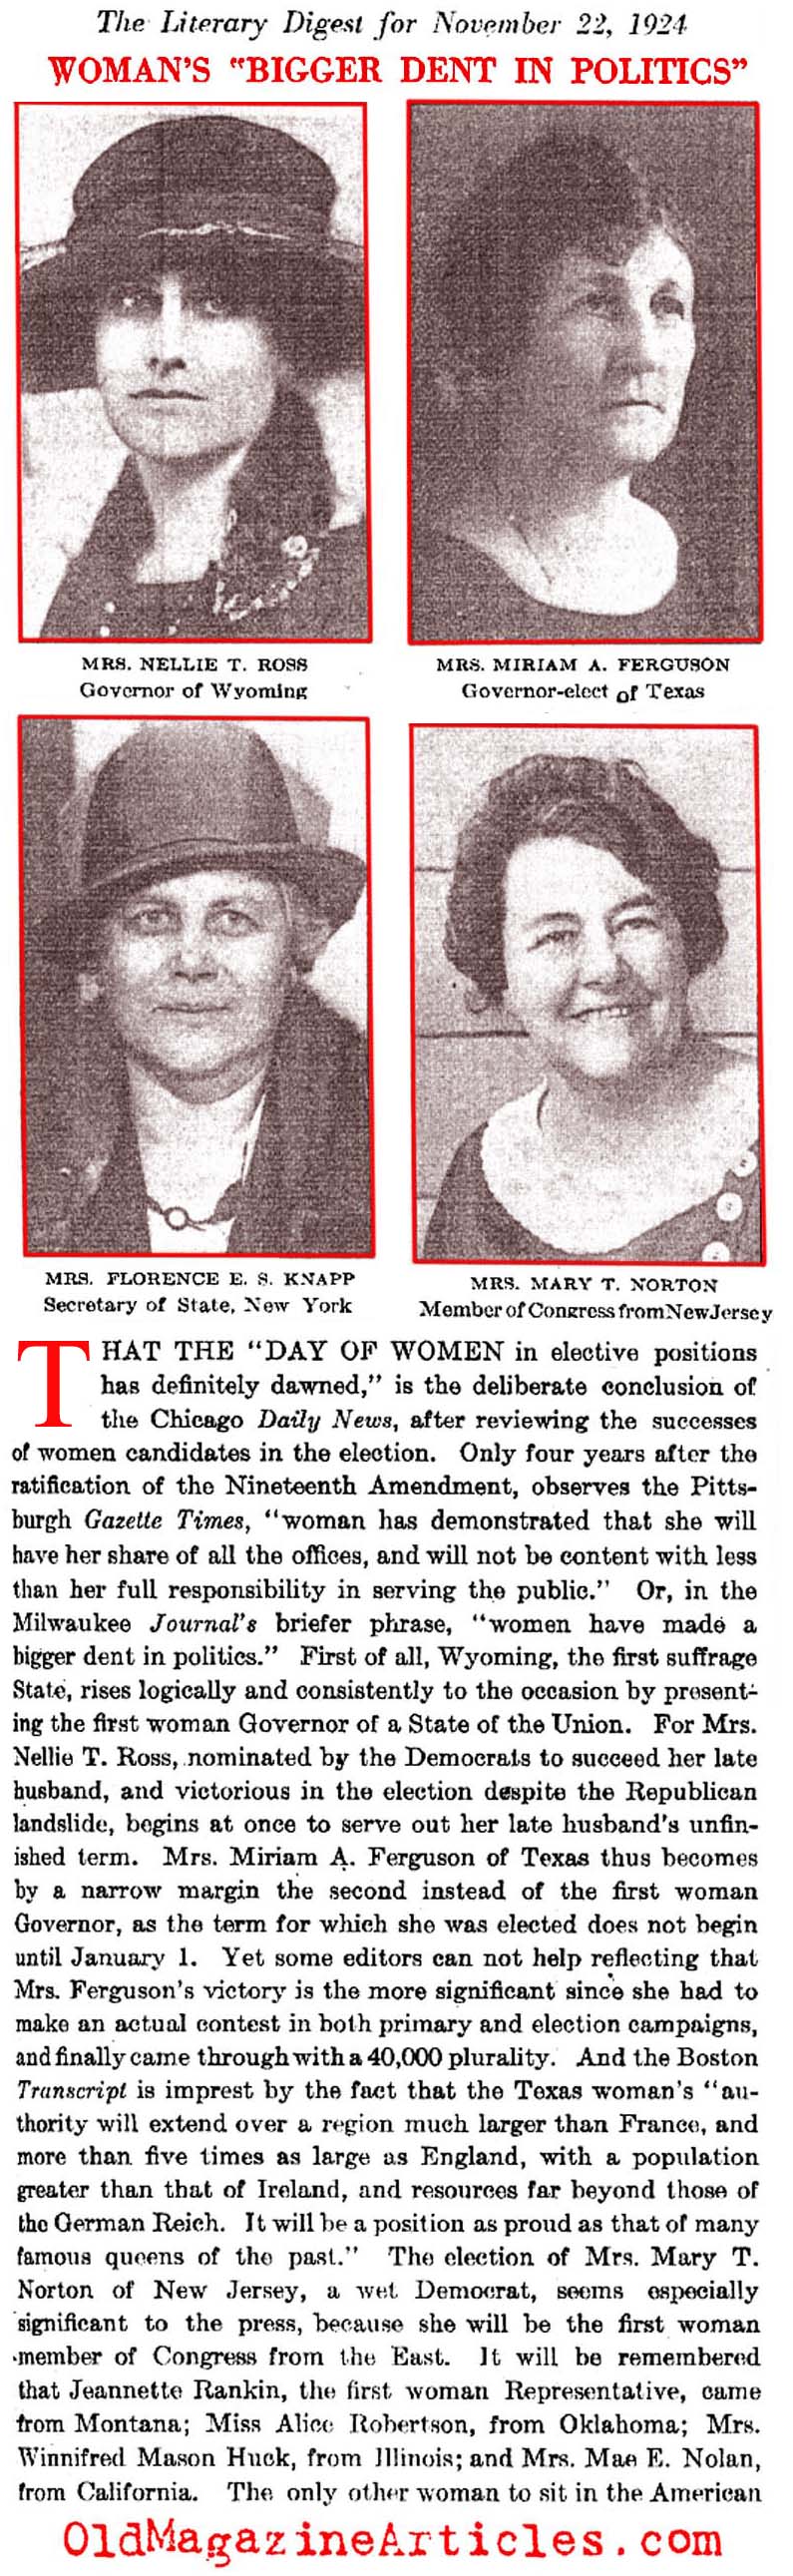 Women Candidates Win Higher Offices (The Literary Digest, 1924)